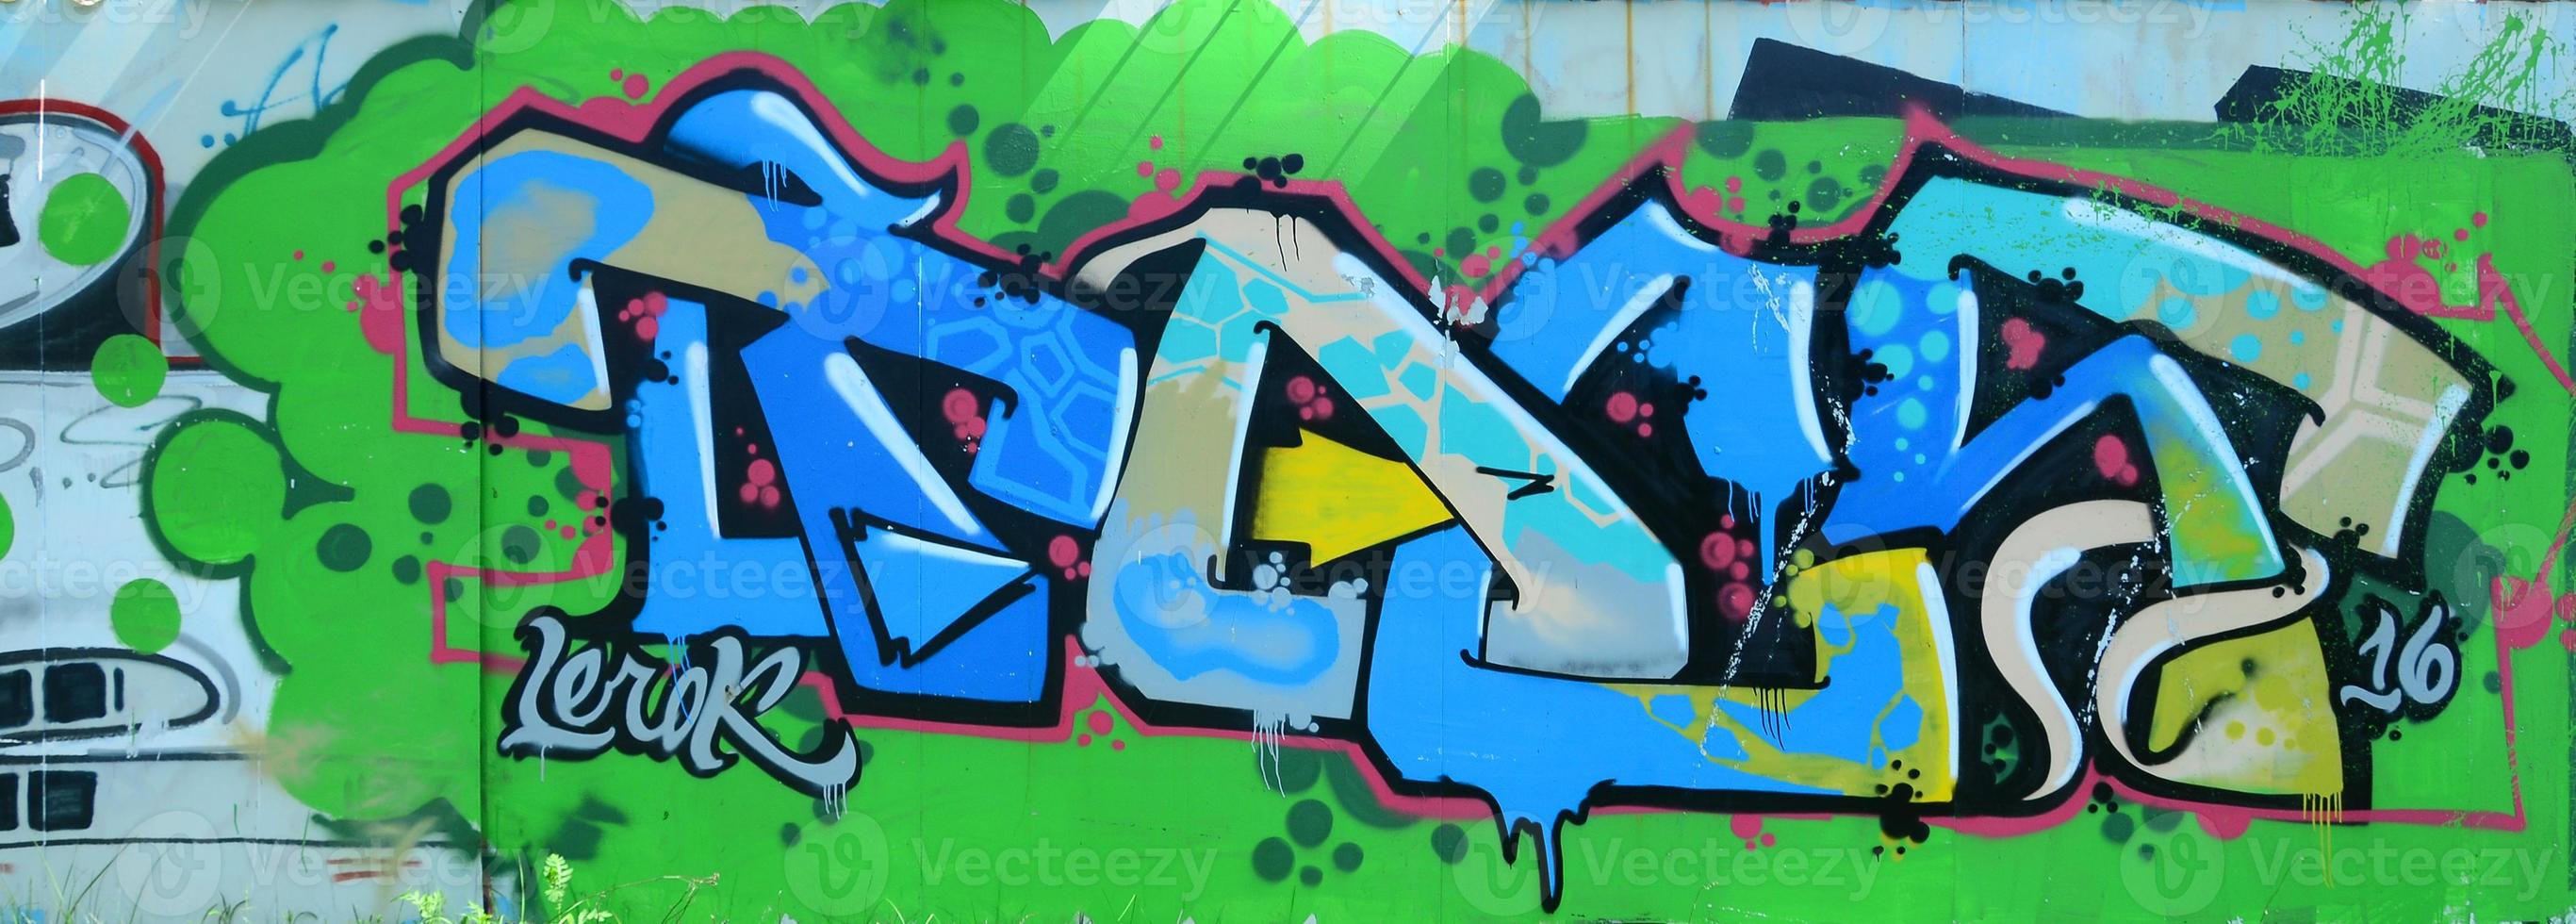 Street art. Abstract background image of a full completed graffiti painting in green and blue tones photo